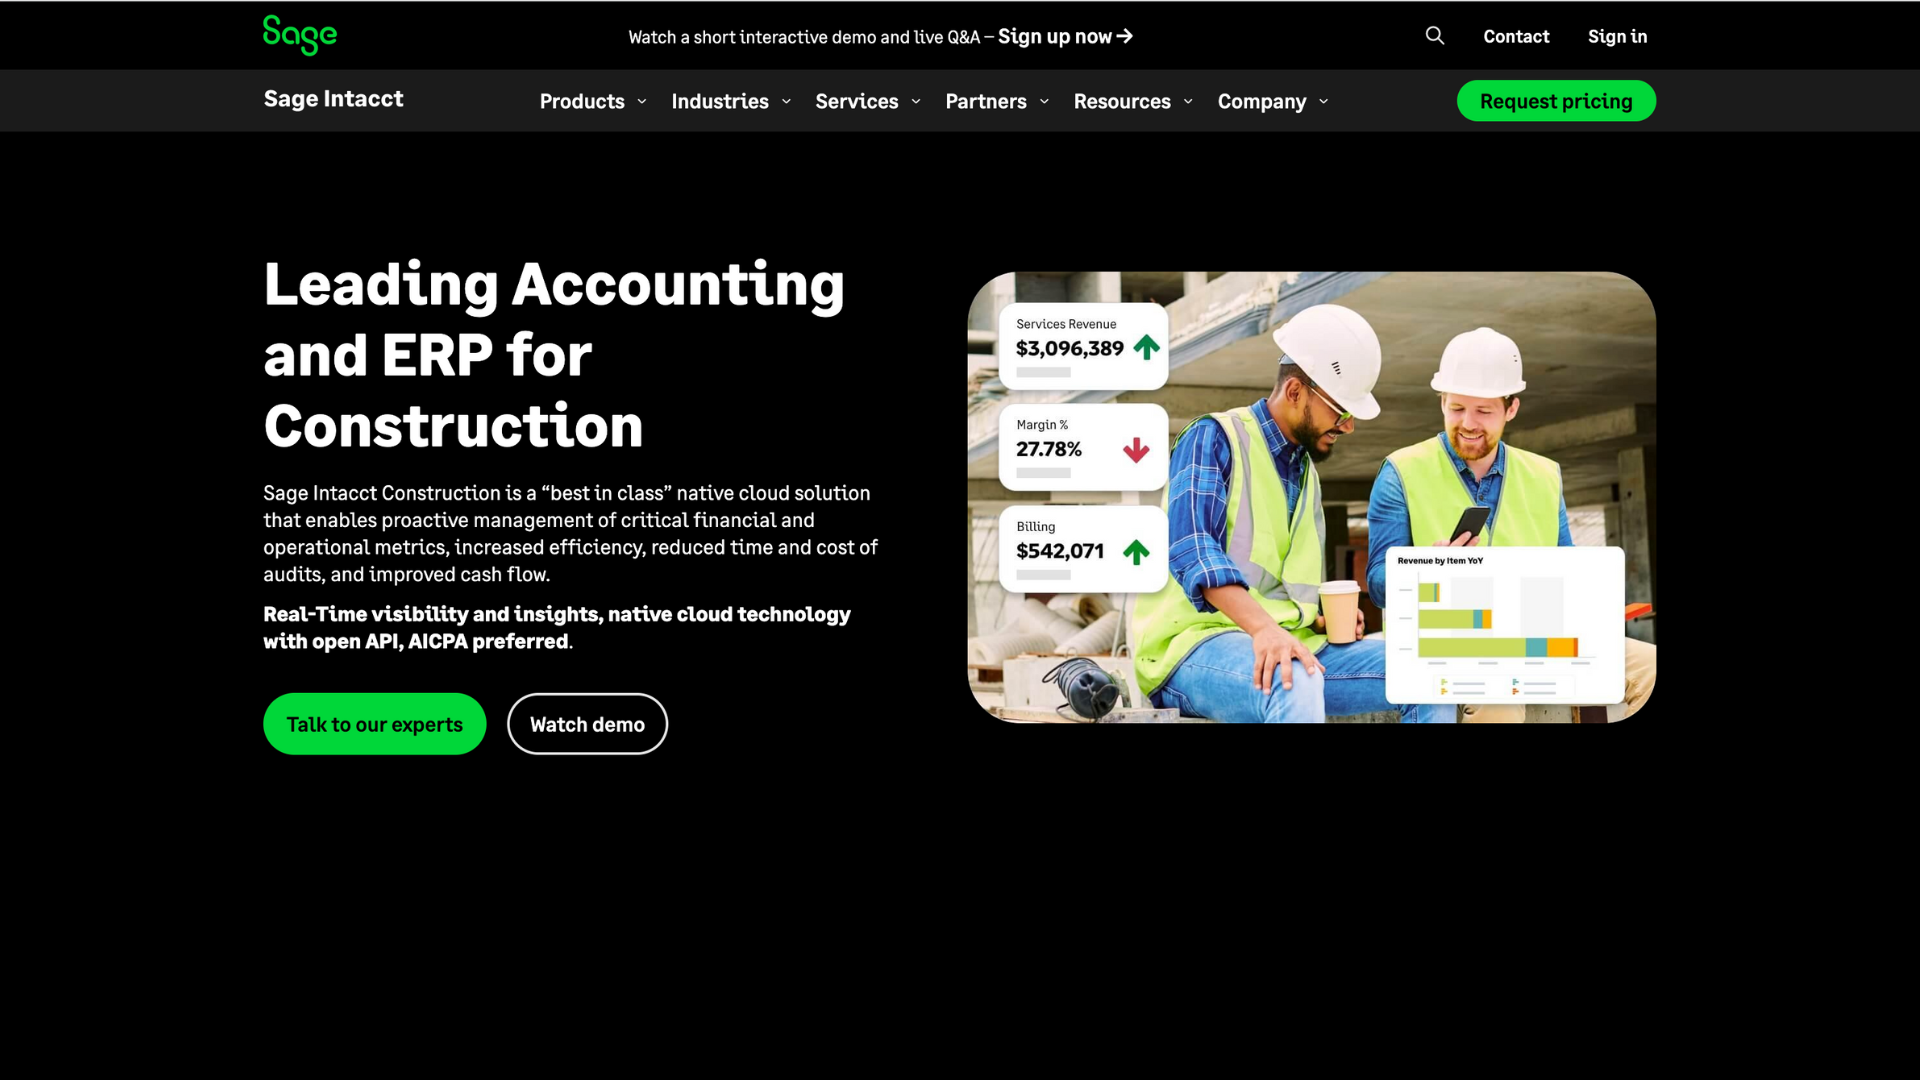 Sage Intacct Construction: Leading Accounting and ERP for Construction